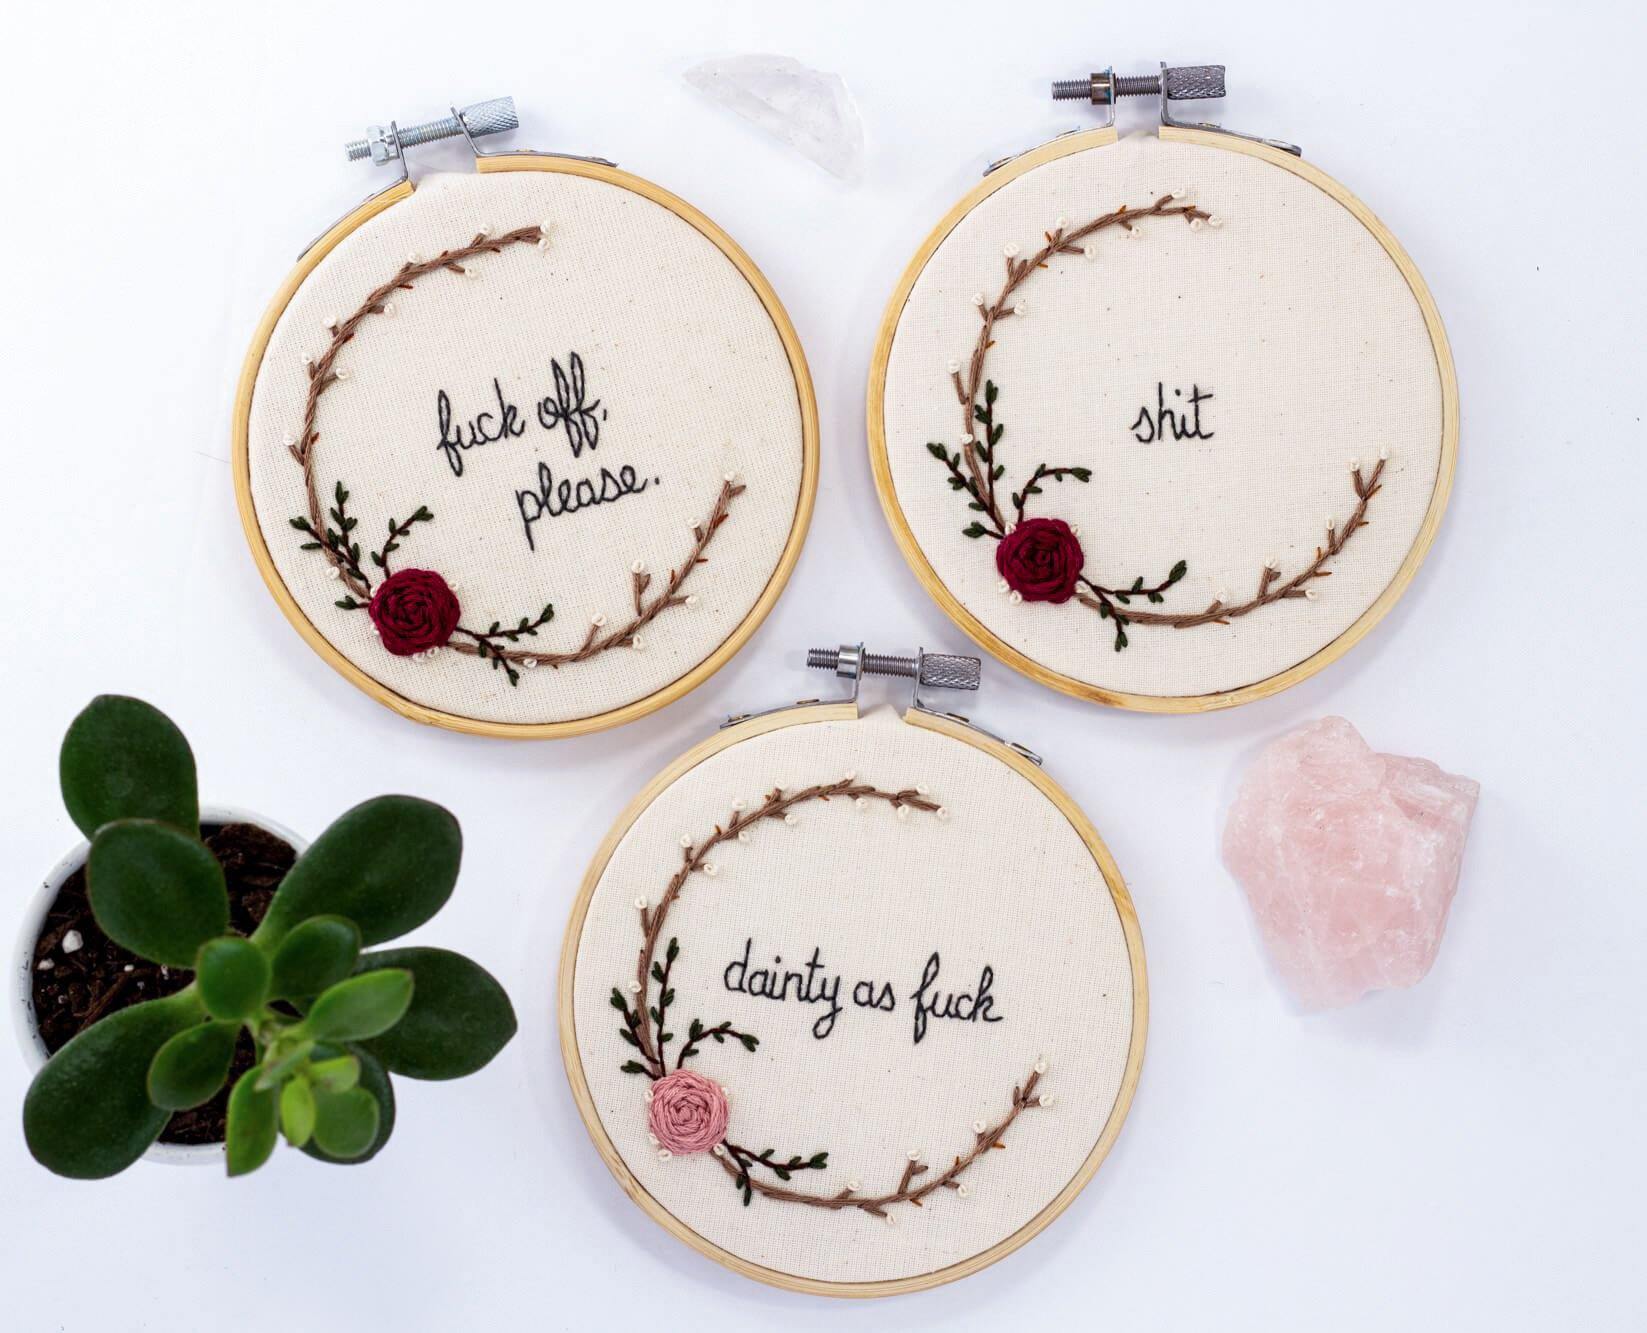 Mini Embroidery Hoop. Small Bamboo Hoop. 4 10cm Round Embroidery